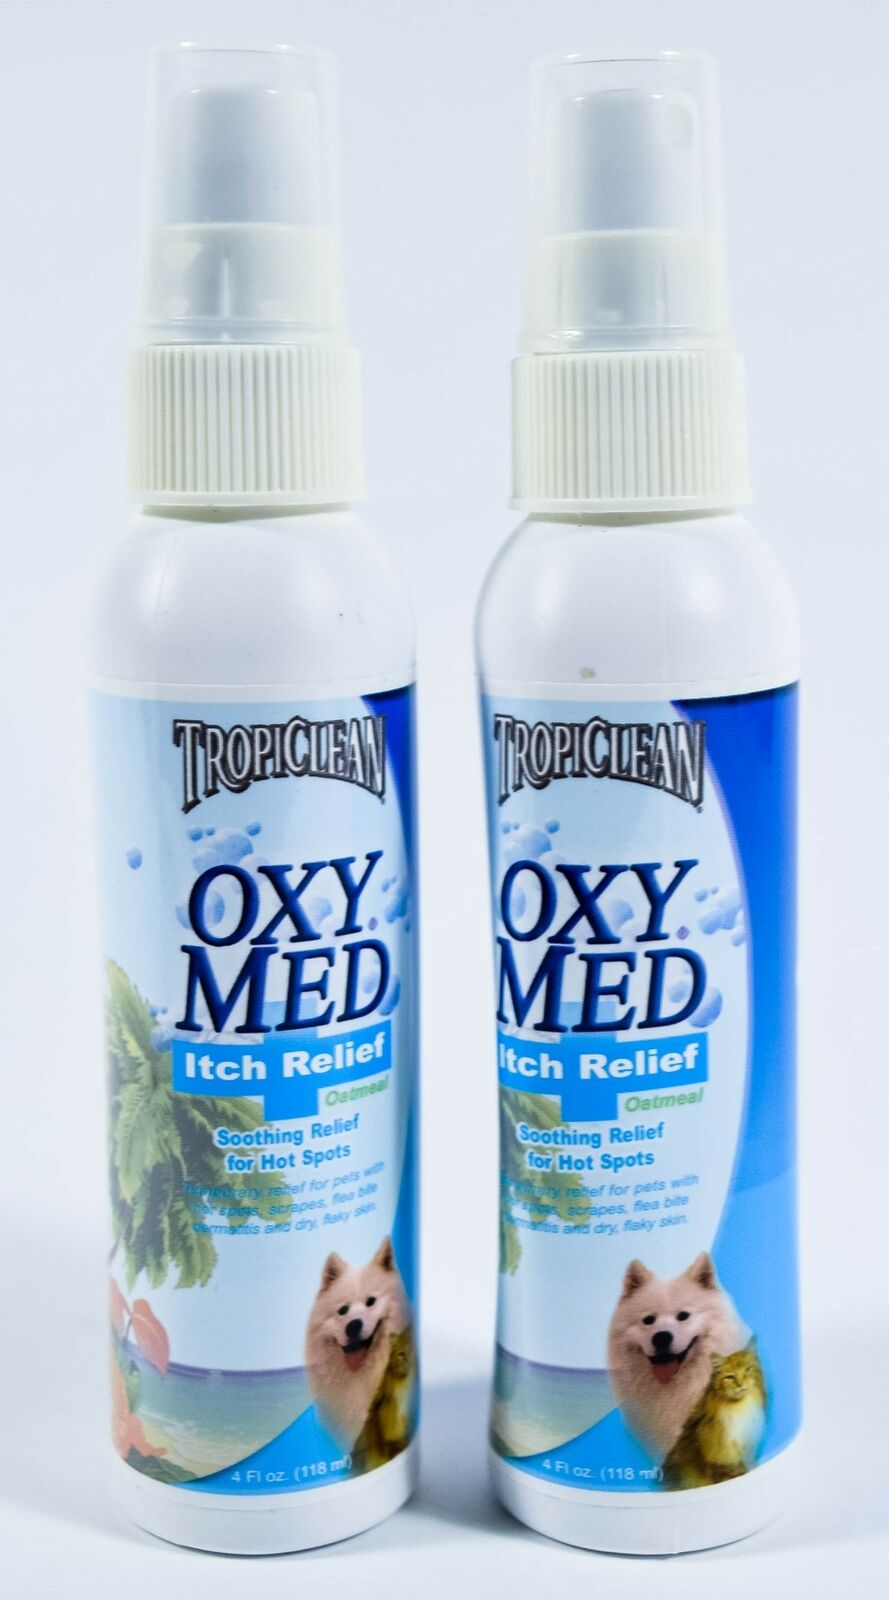 2 TropiClean OxyMed Medicated OATMEAL ITCH RELIEF Soothing Spray